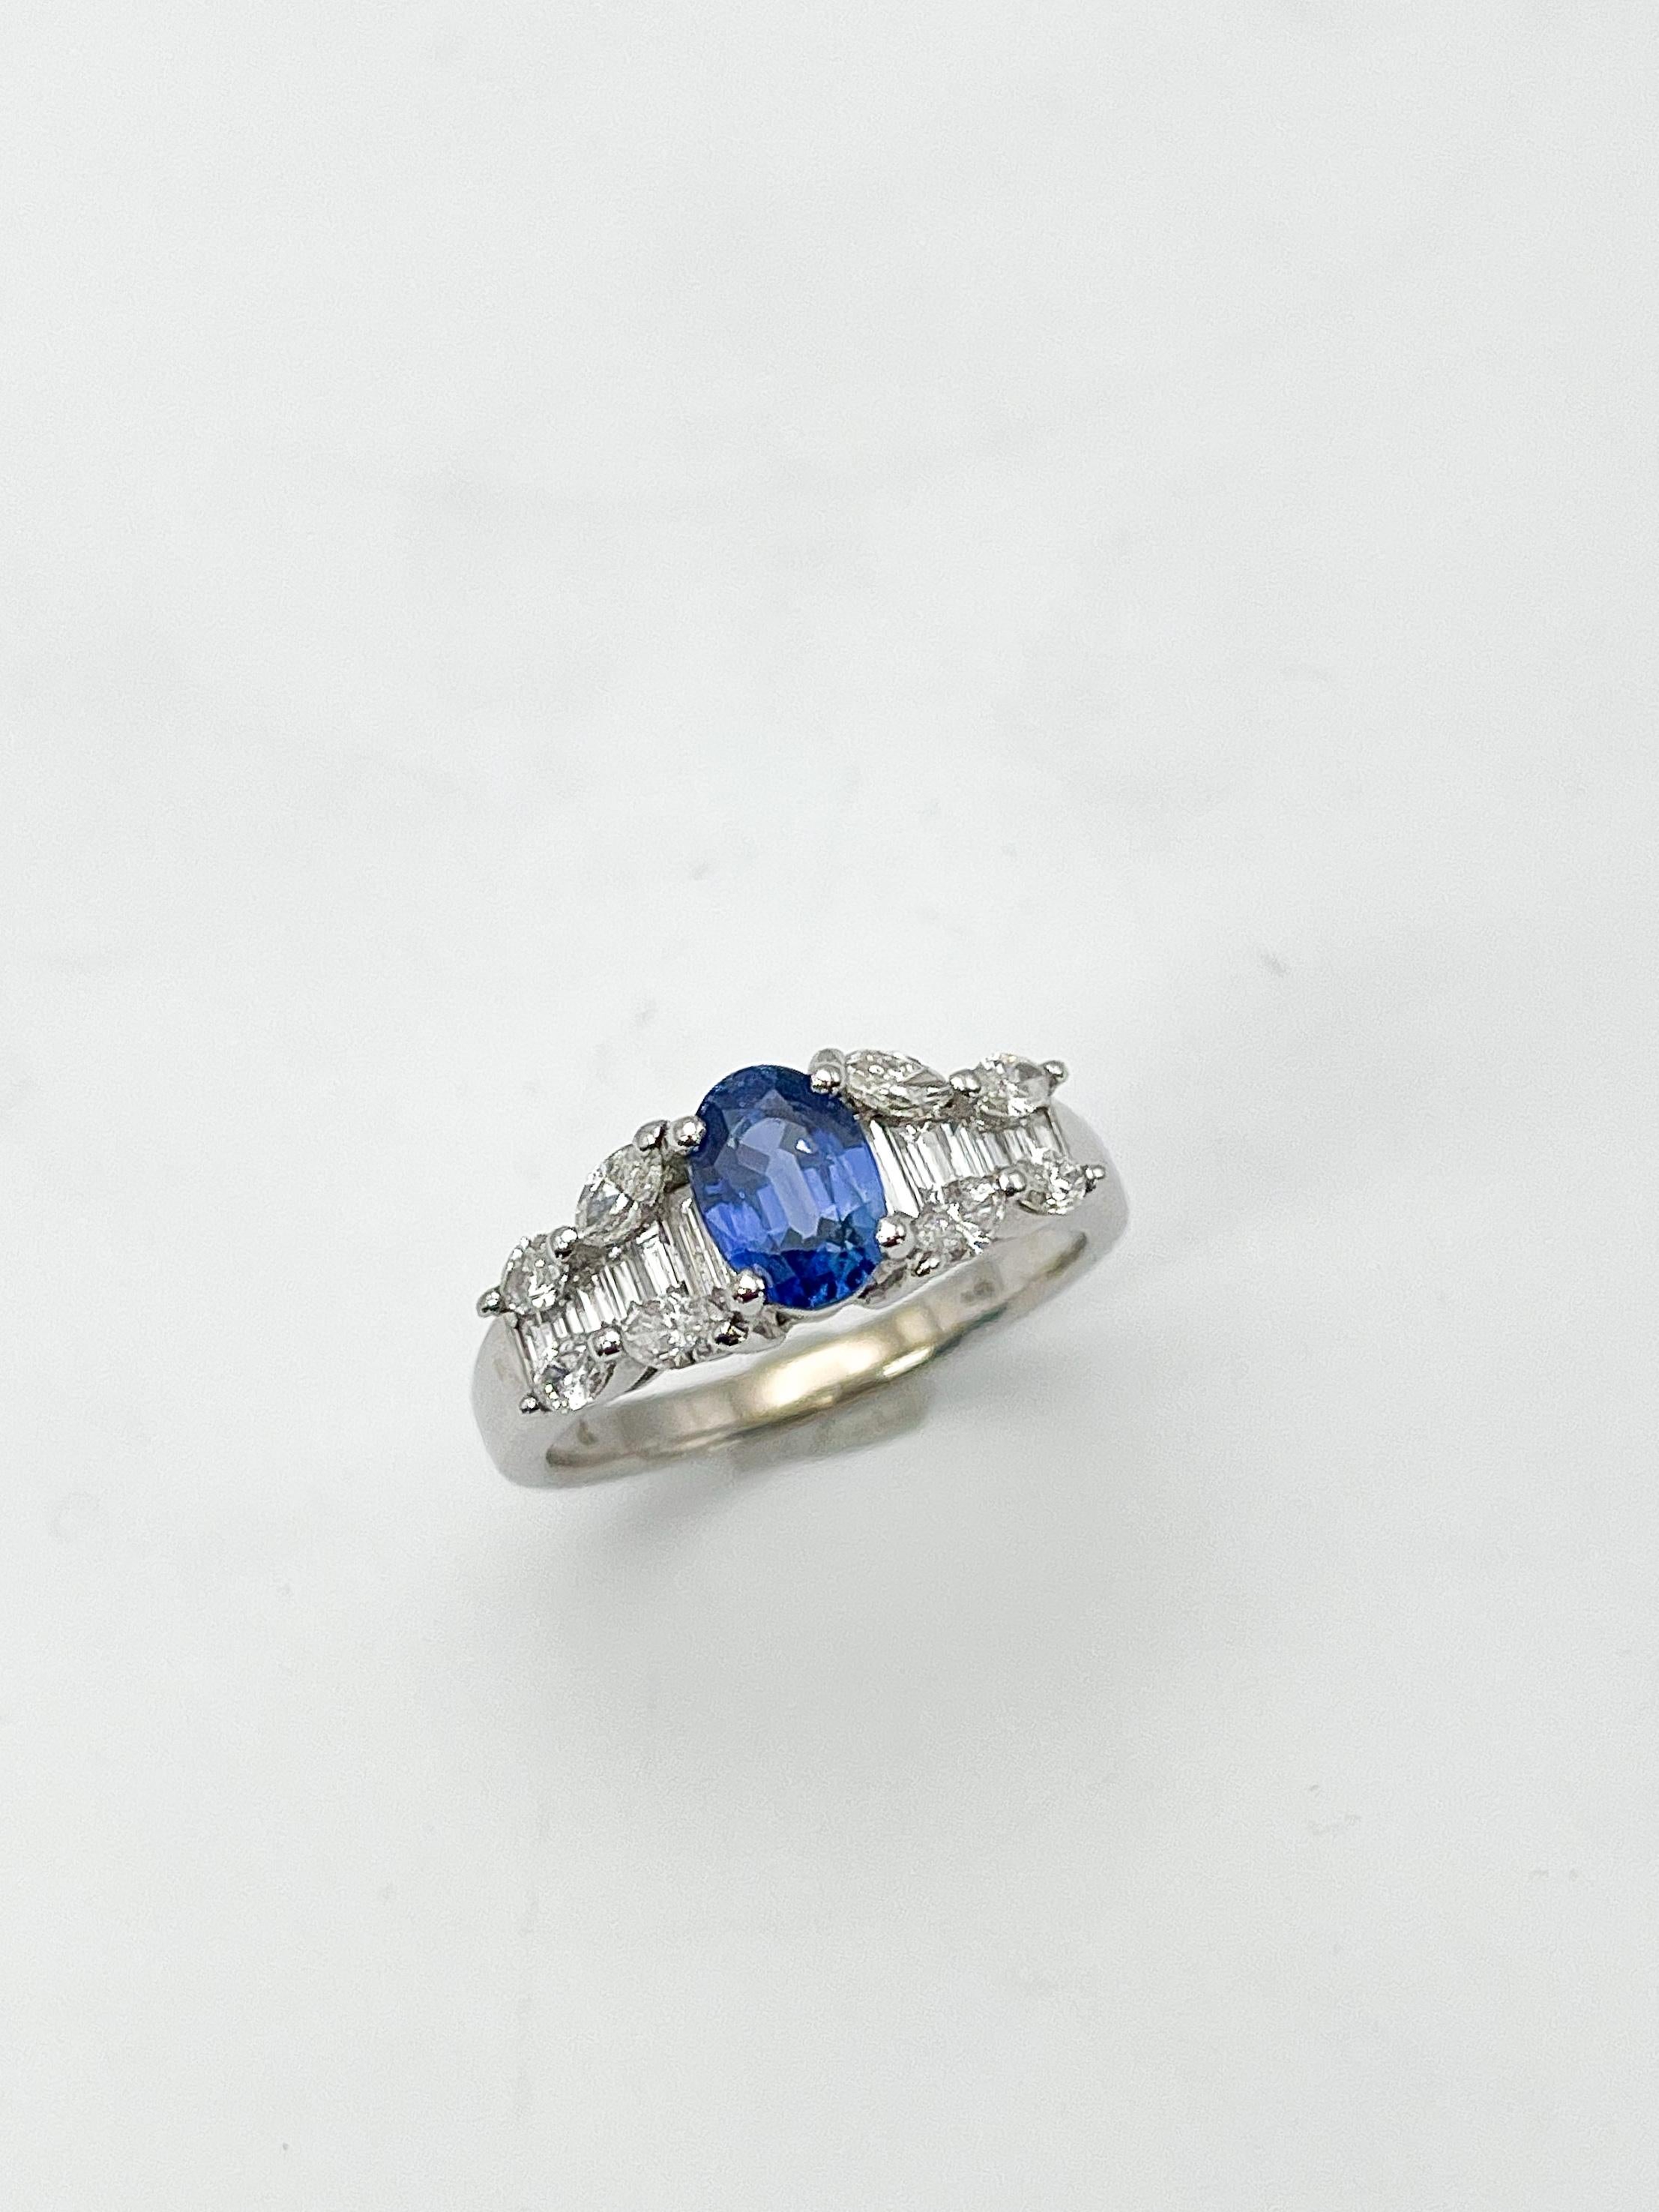 14k white gold diamond and blue oval sapphire ring. This ring has 8 marquise cut diamonds and 14 baguette diamonds along with the sapphire. The sapphire measures 4.7x6.8mm, ring is a size 5 3/4, band width is 2mm, and weighs 4.19 grams.